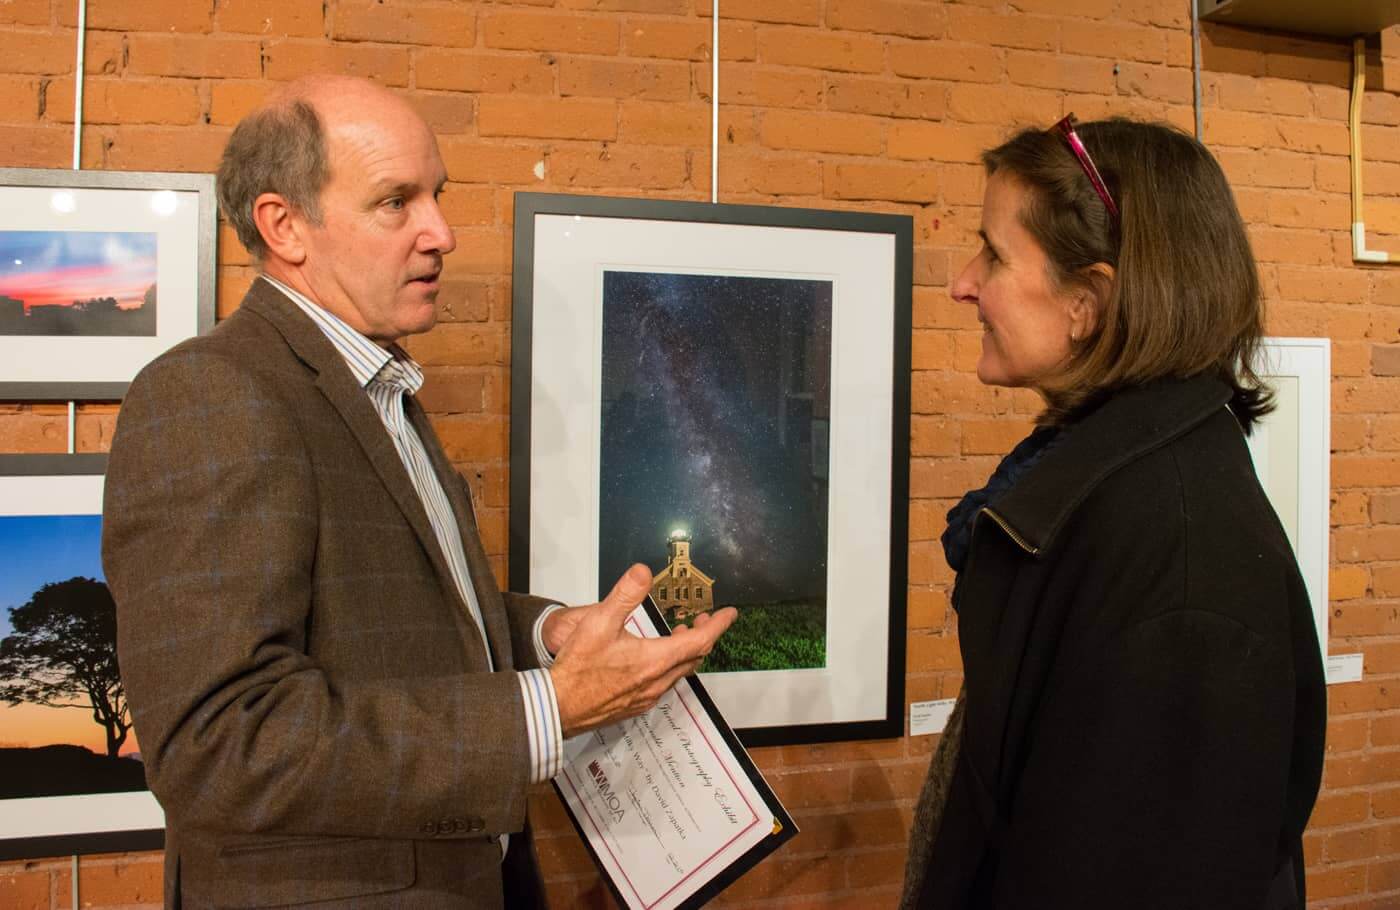 David Zapatka explains the process he used for his photograph, "North Light Milky Way" which won an honorable mention Wednesday night at WMOA.